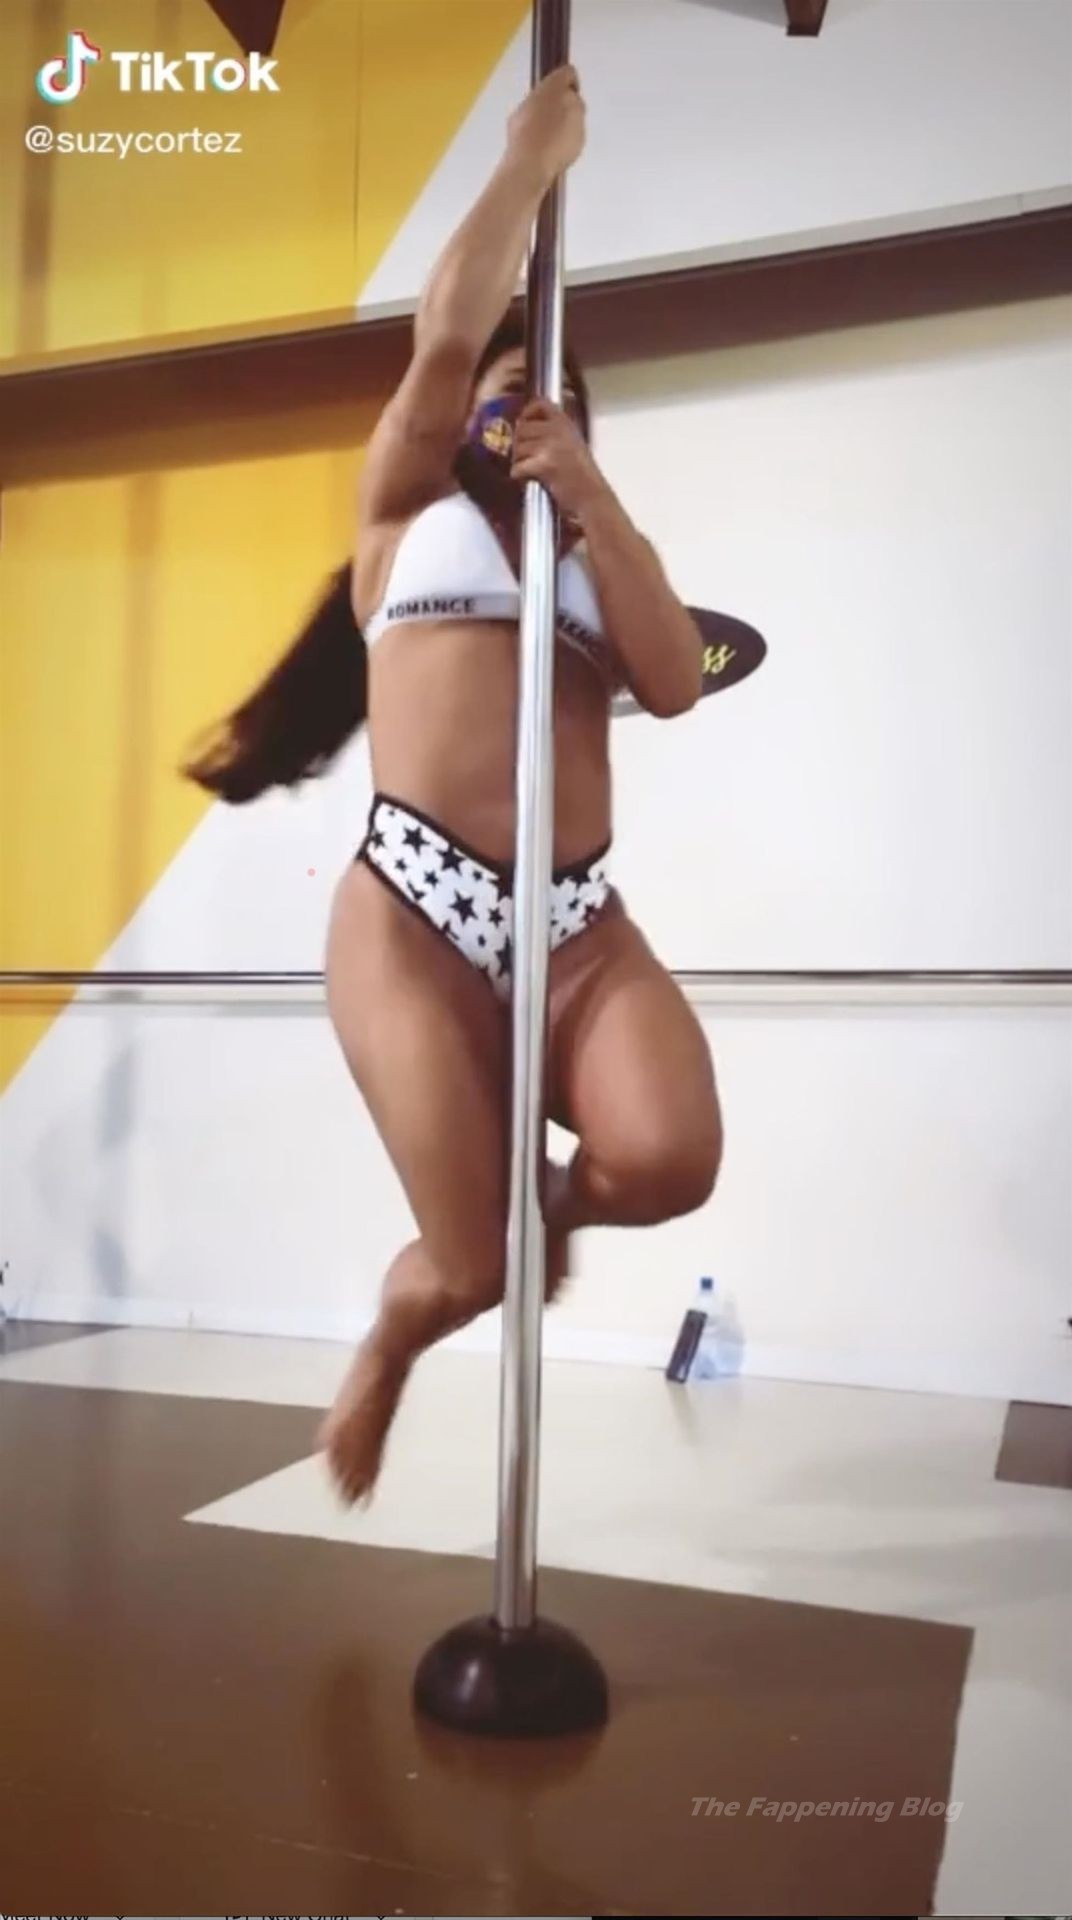 Suzy Cortez Gets the Pulses Racing with a Sexy Display on a Pole (11 Pics + Video)